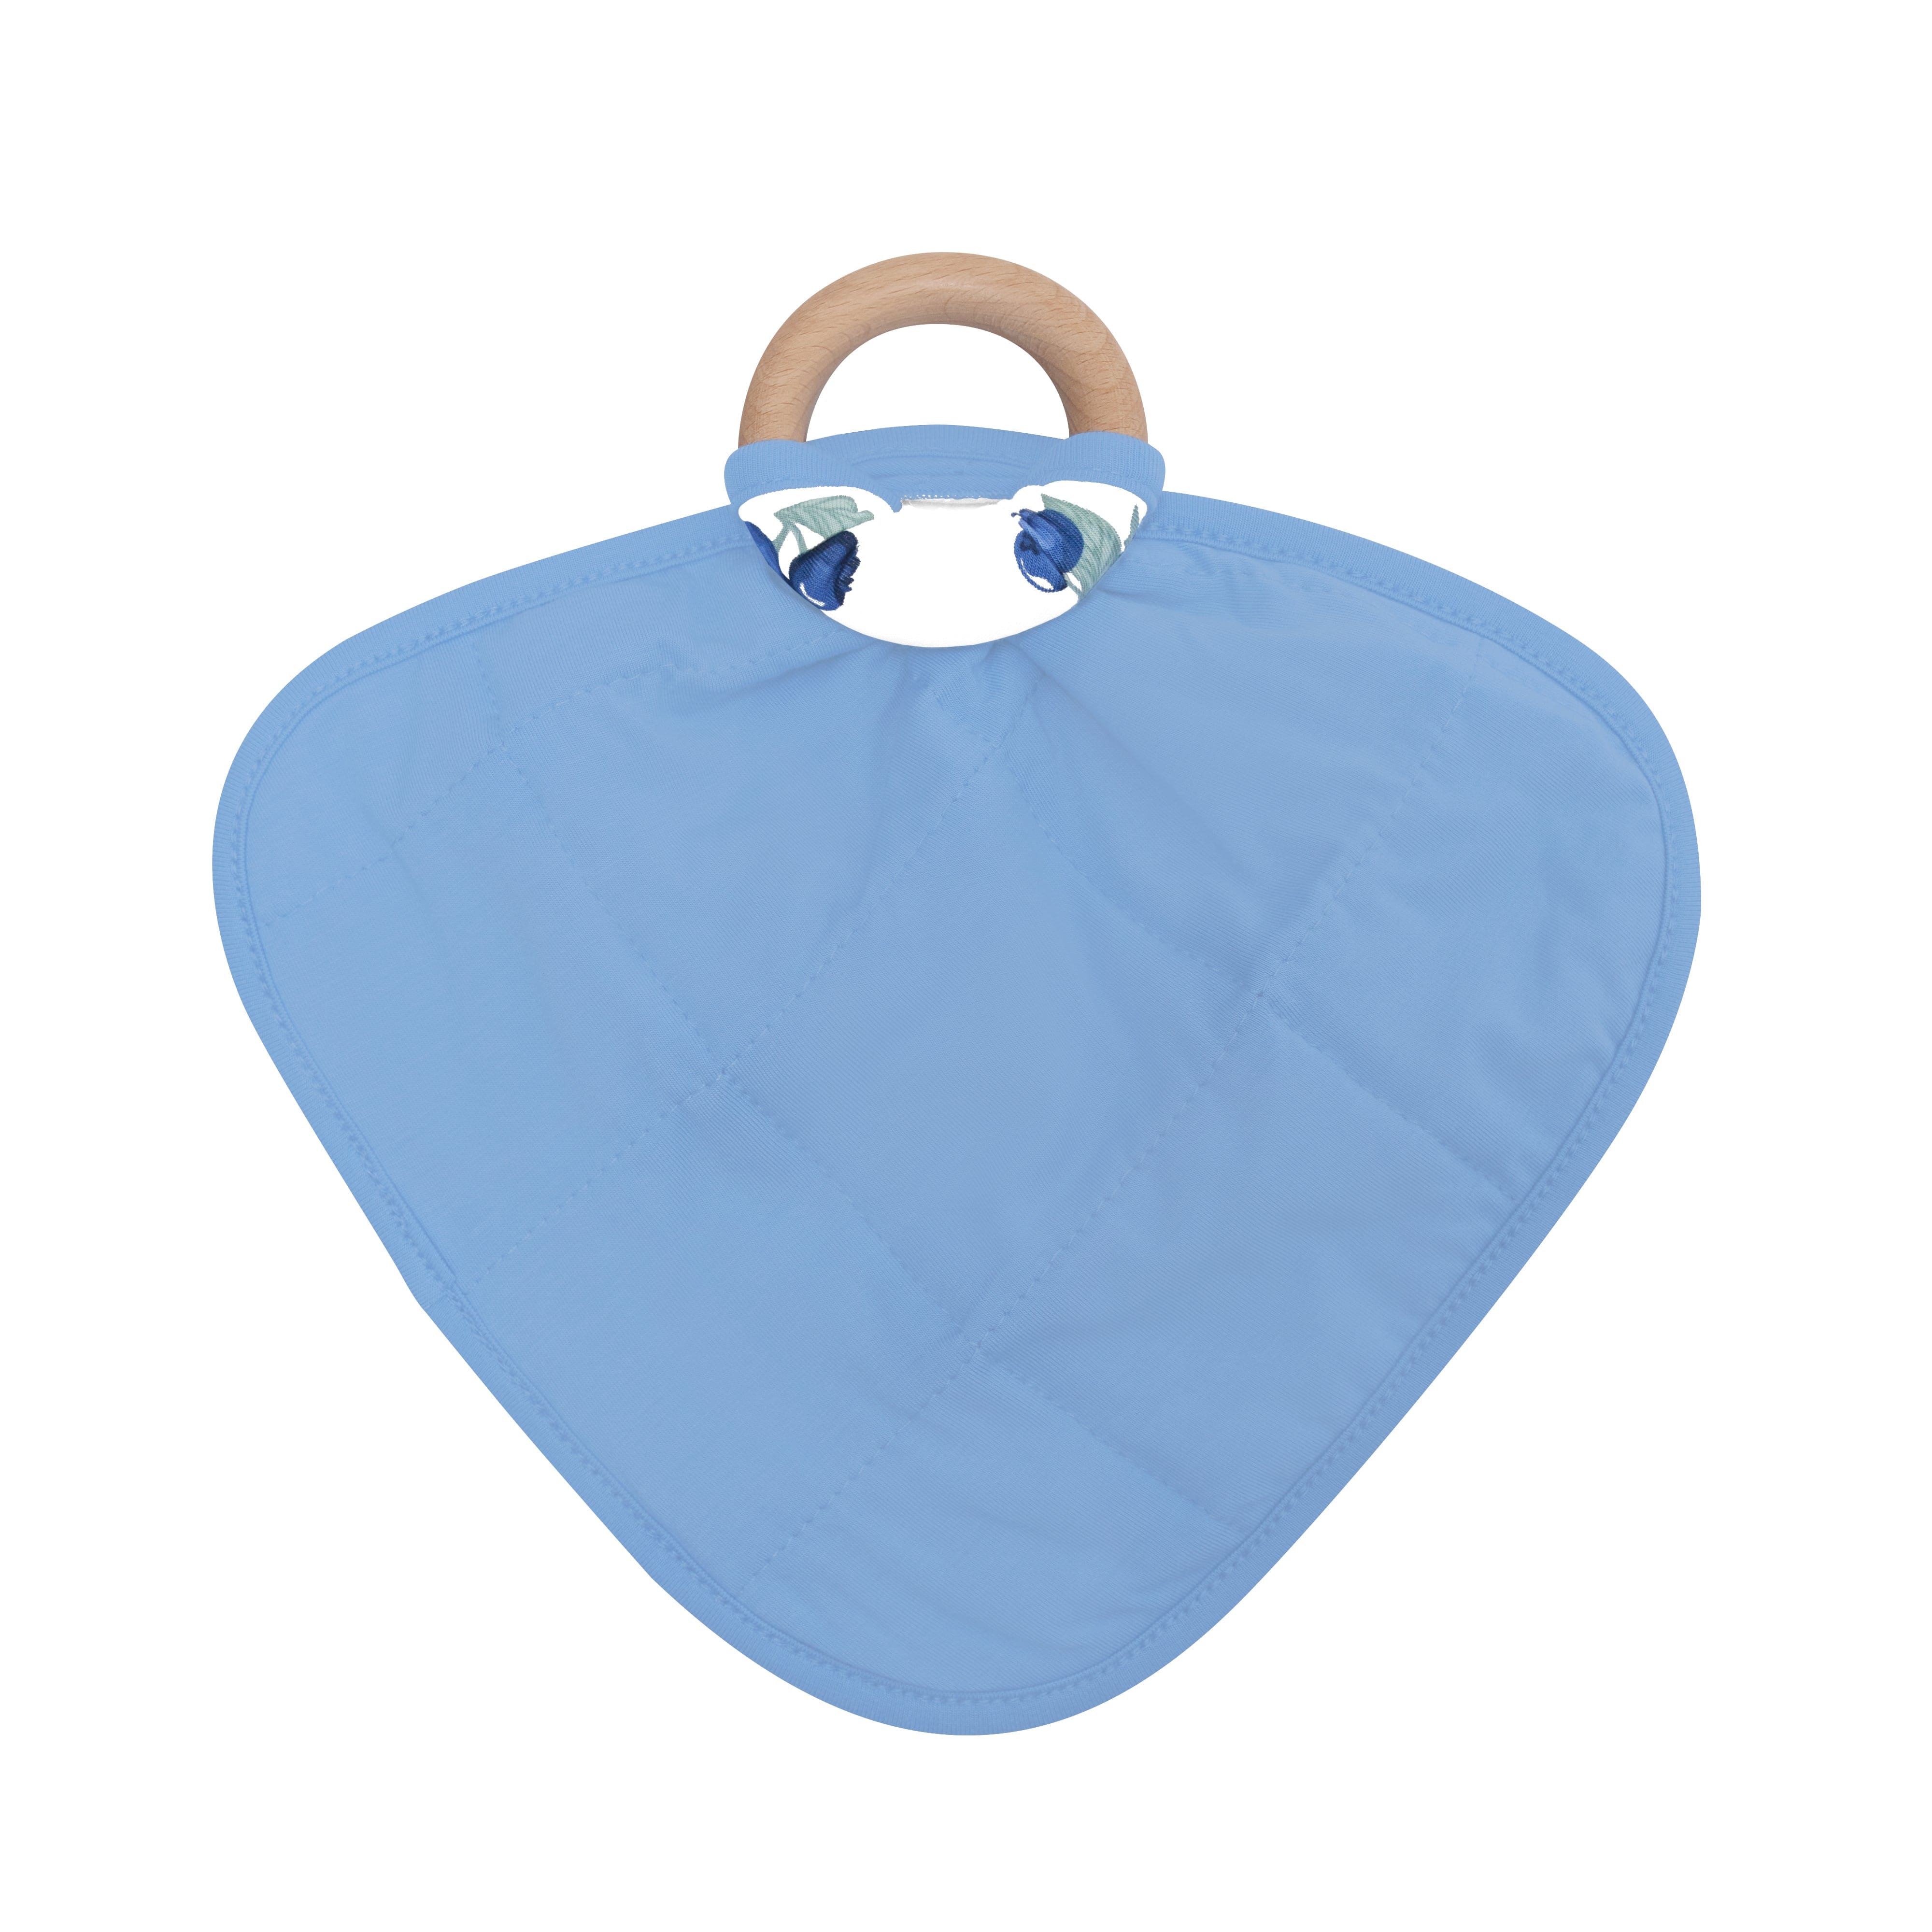 Kyte Baby Lovey Blueberry / Infant Lovey in Blueberry with Removable Teething Ring